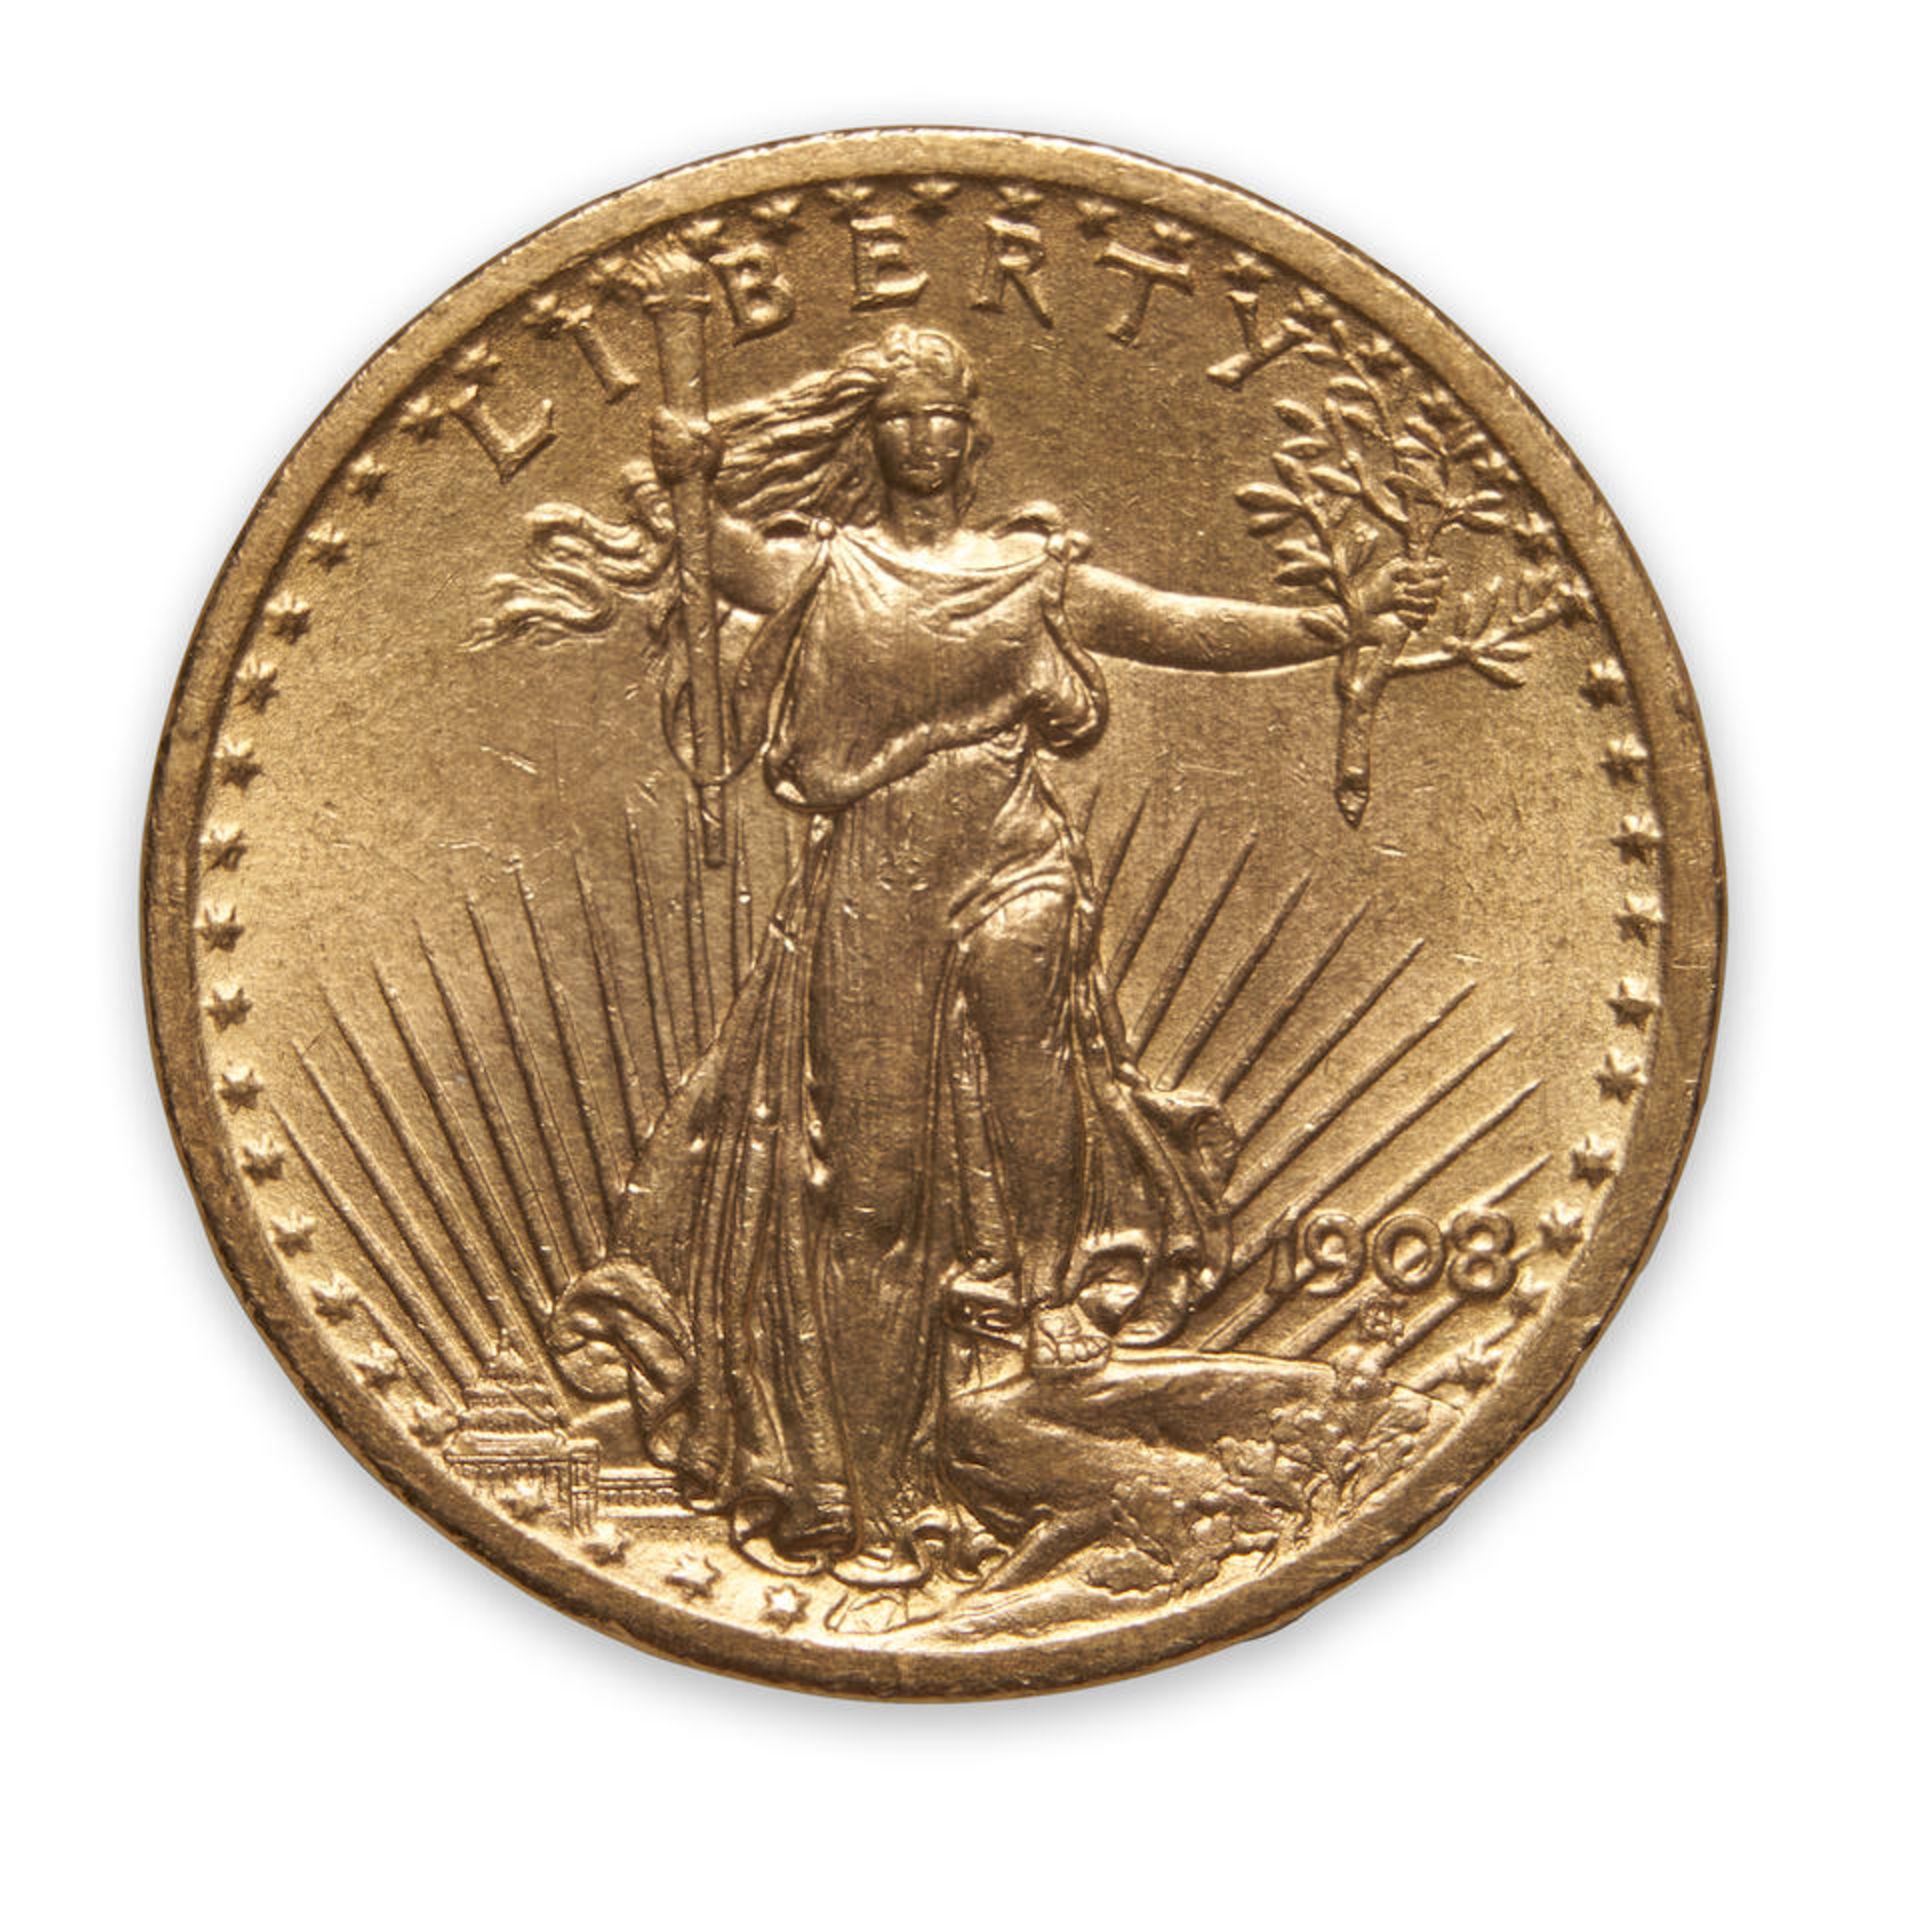 United States 1908 No Motto St. Gaudens $20 Double Eagle Gold Coin.